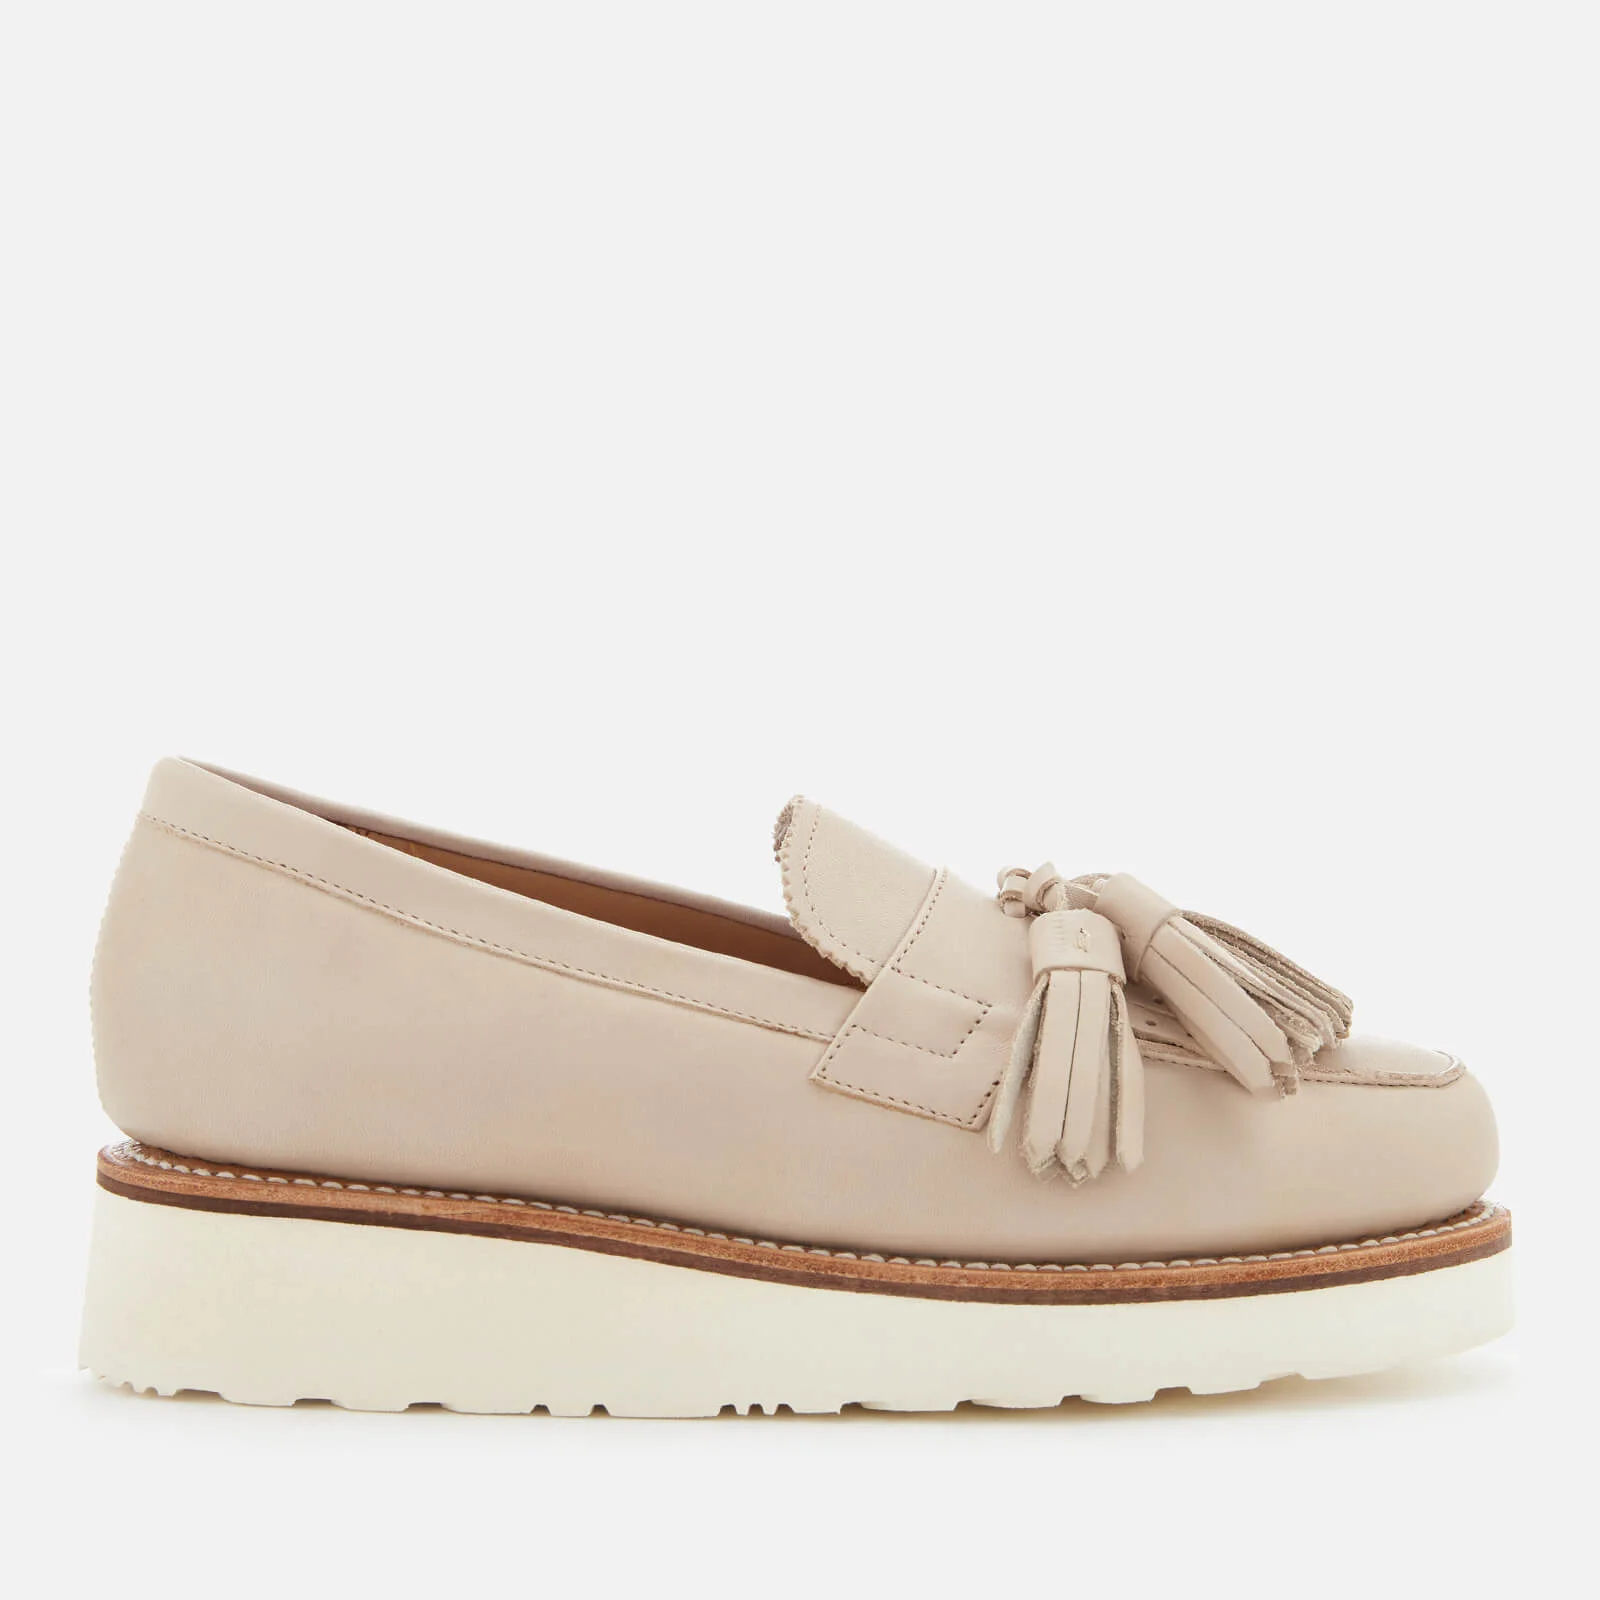 Grenson Women's Clara Leather Tassle Loafers - Natural Image 1